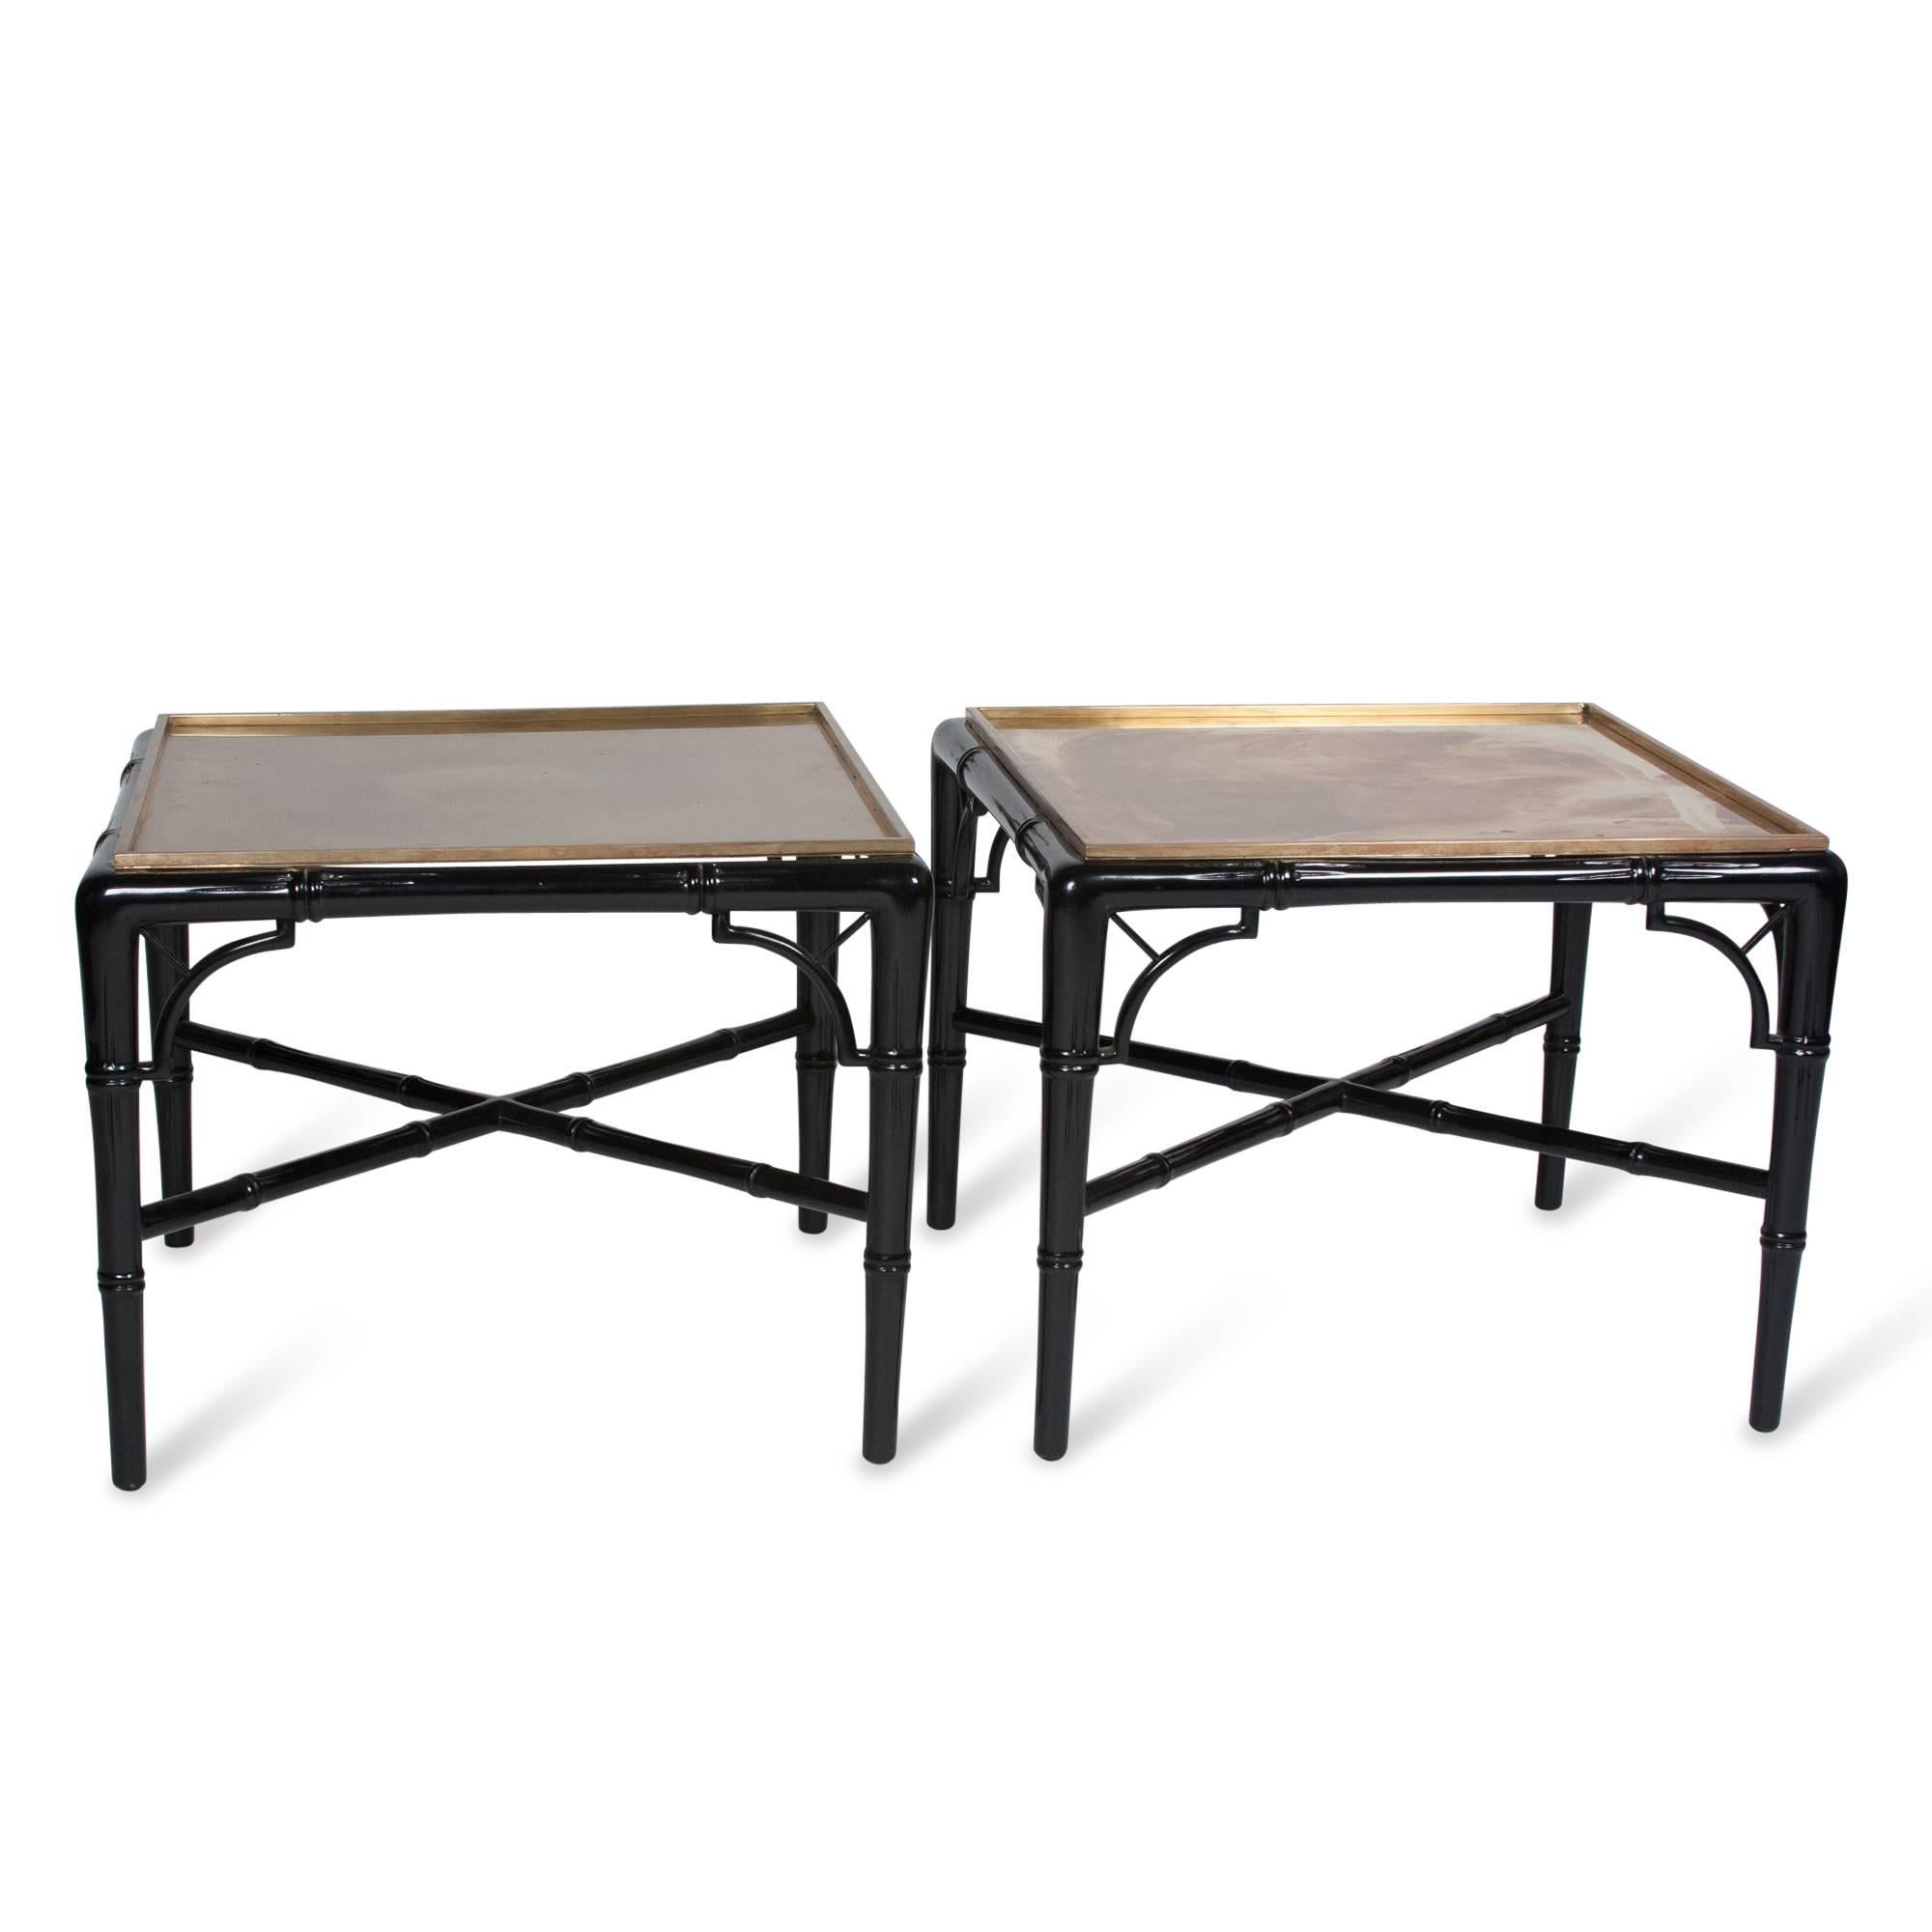 Pair of square end tables with bronze trays set into faux bamboo black lacquer bases, X-stretcher by Billy Haines, American, circa 1940. Measures: 19 1/2 in square, height 15 3/4 in.